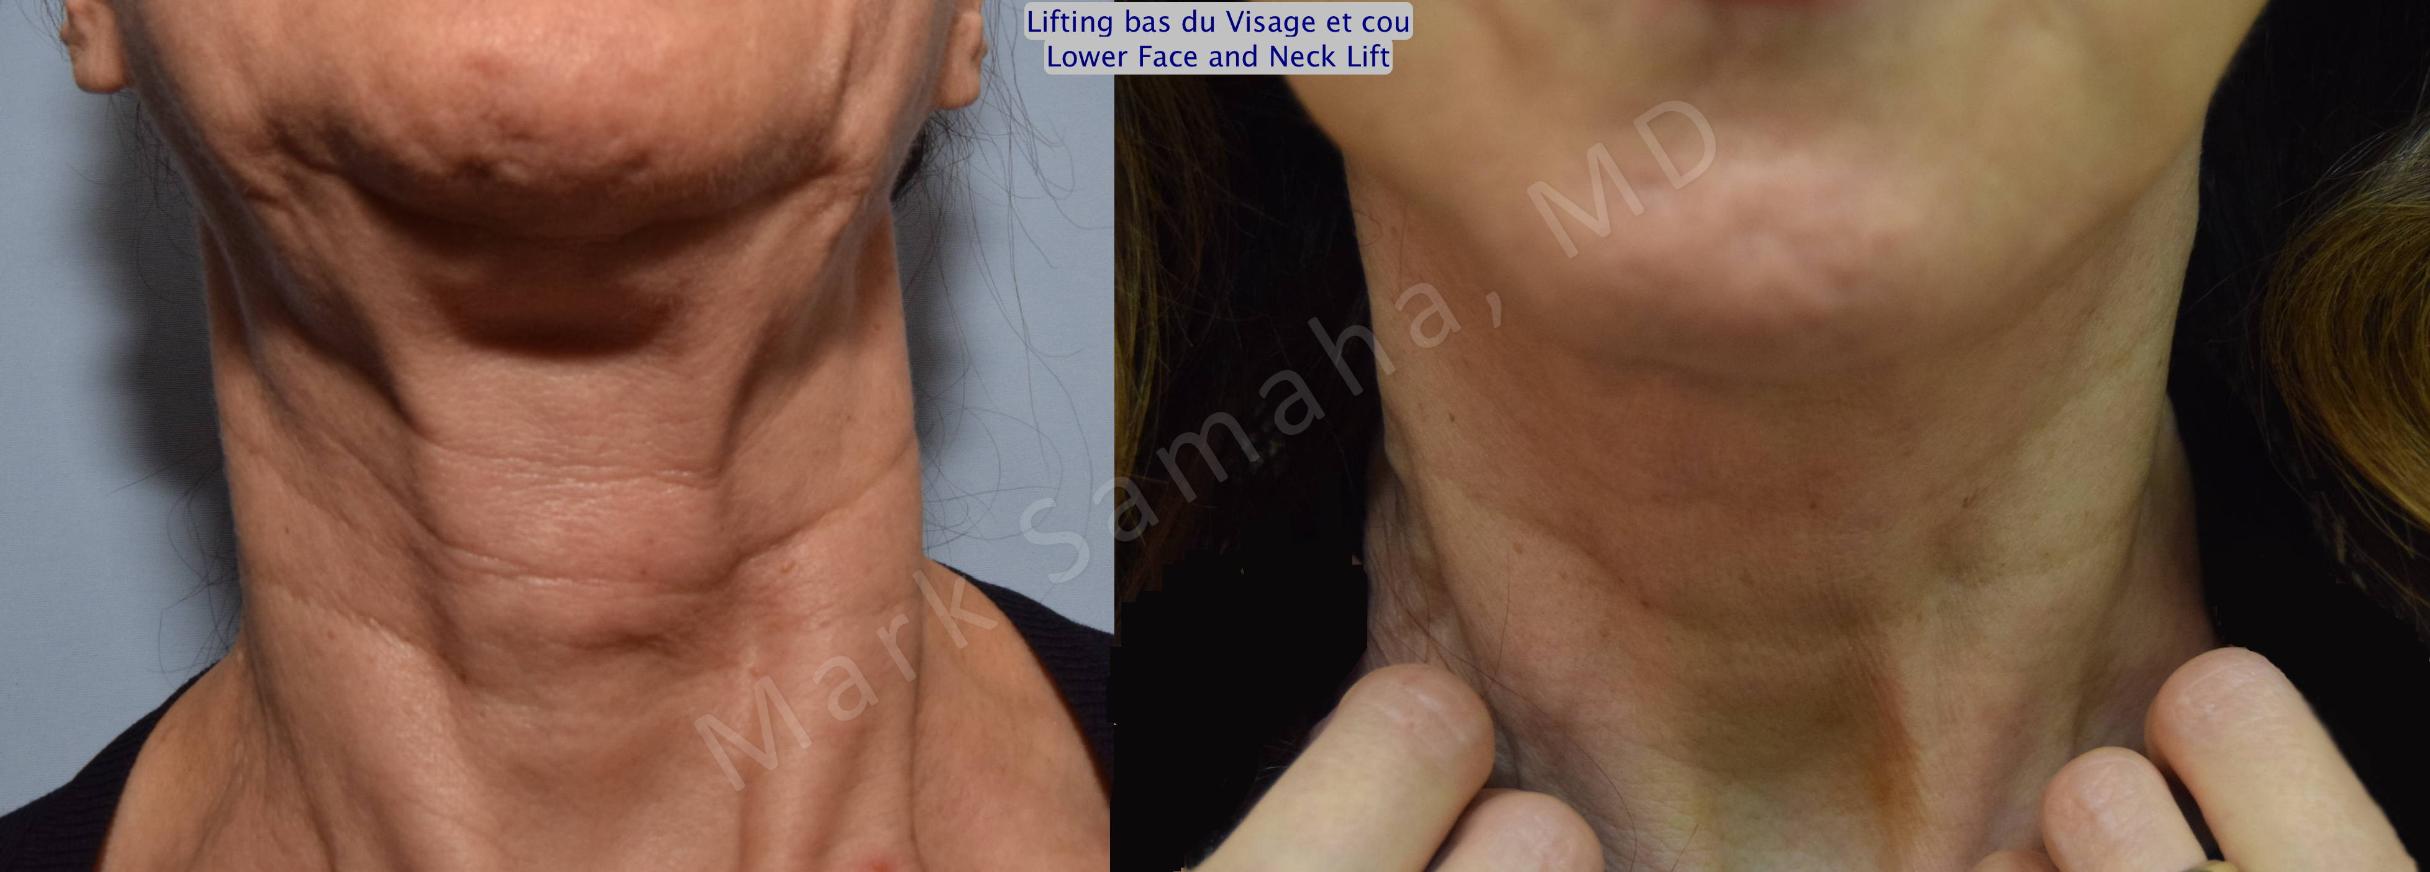 Before & After Facelift / Necklift - Lifting du visage / Cou Case 101 View #1 View in Mount Royal, QC